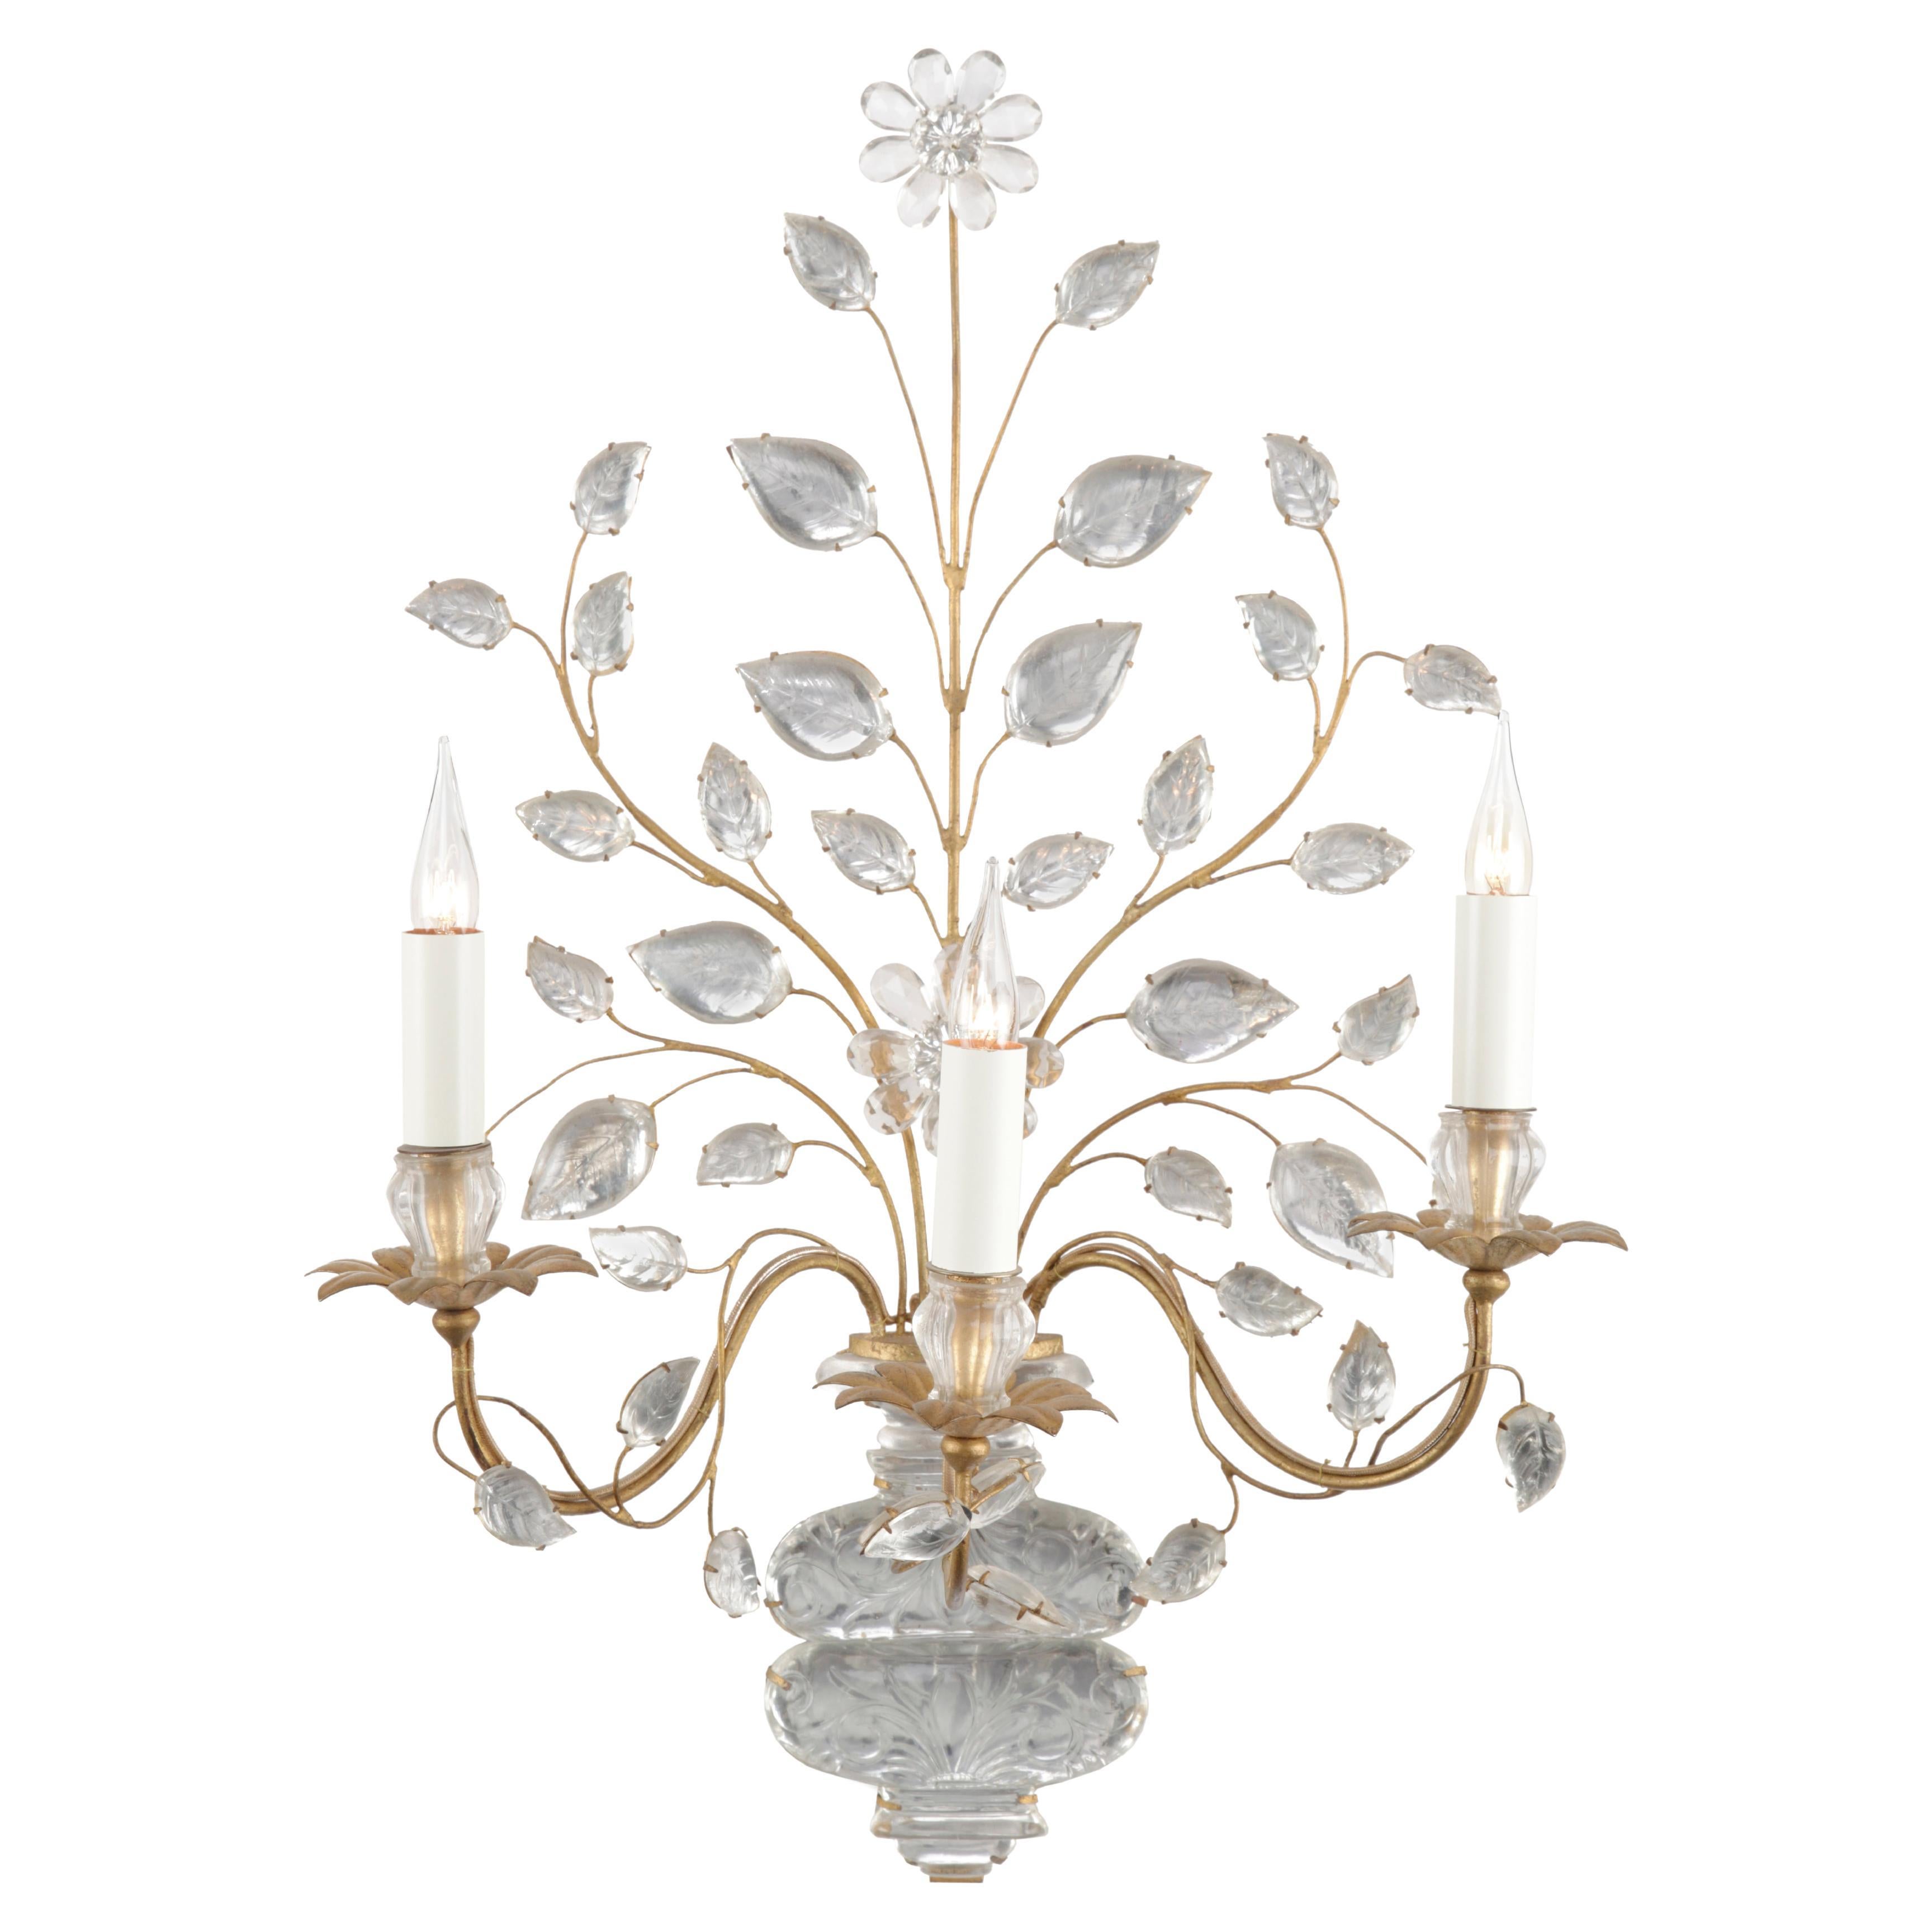 Certified Maison Bagues Sconce, Iron and Crystal 3 Lights #00020 For Sale